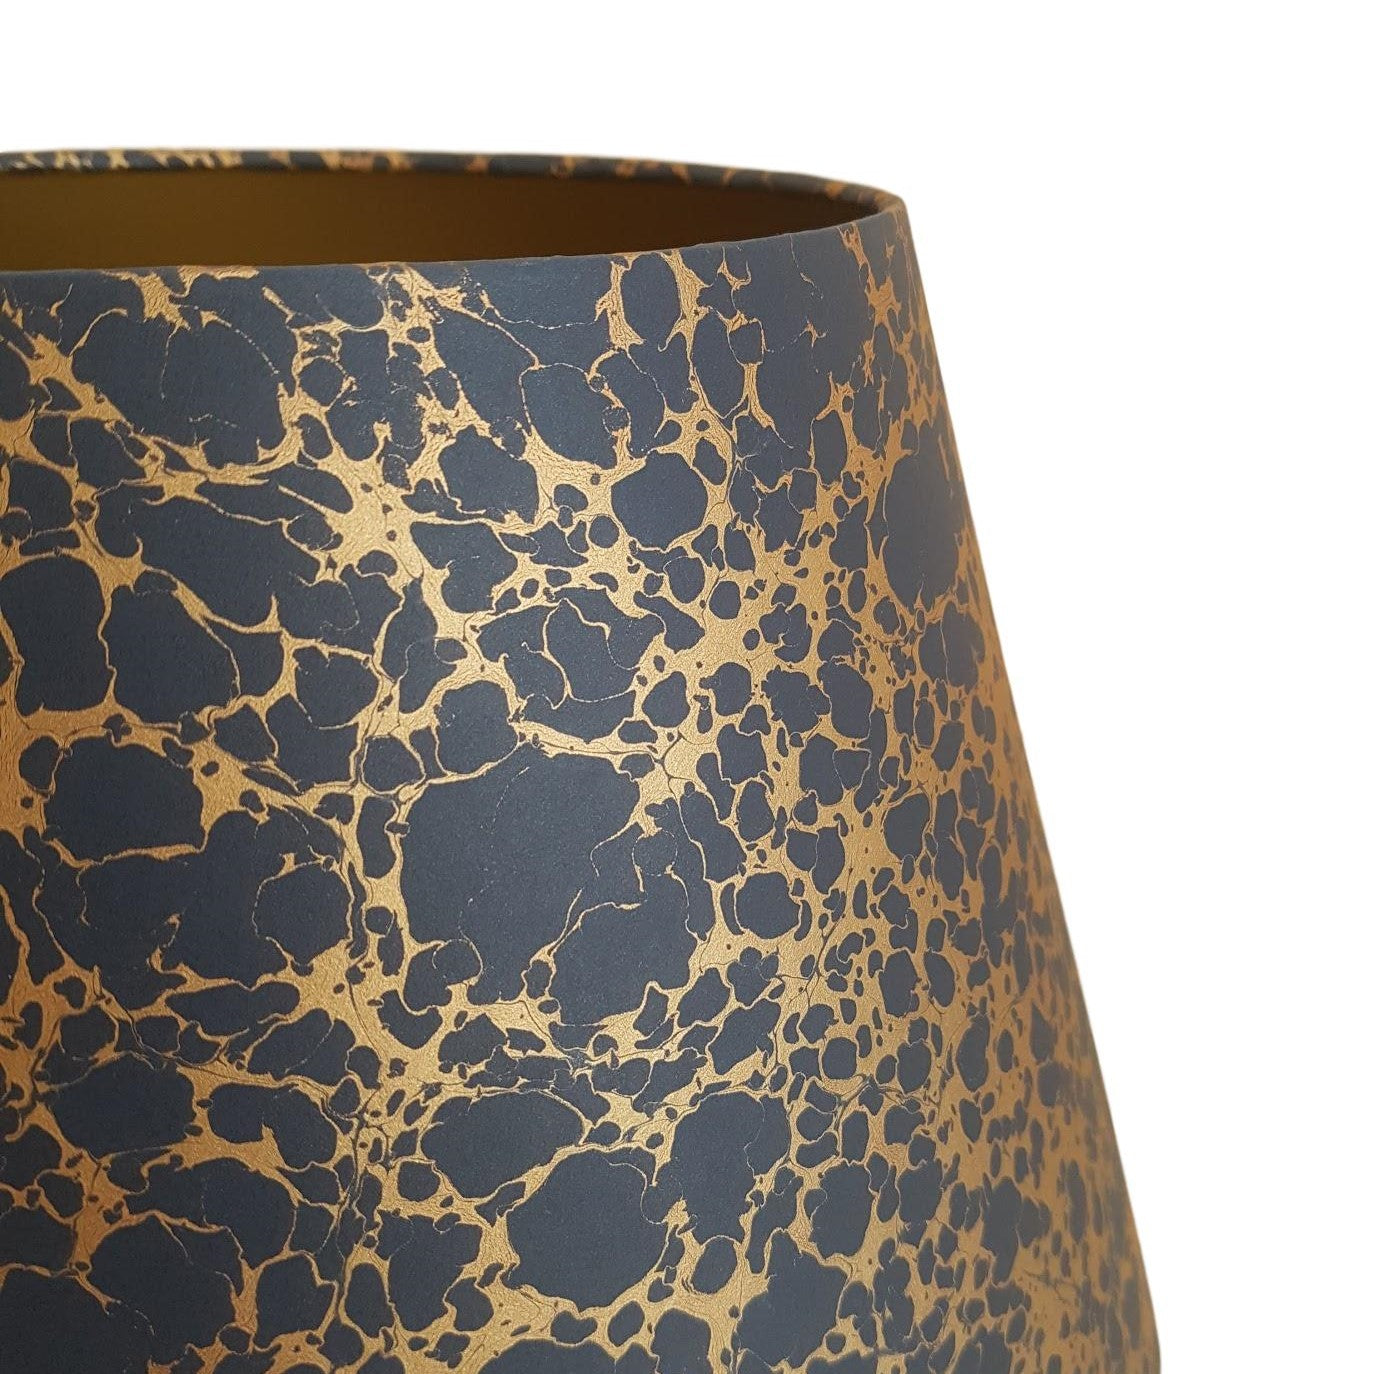 navy blue and gold lampshade